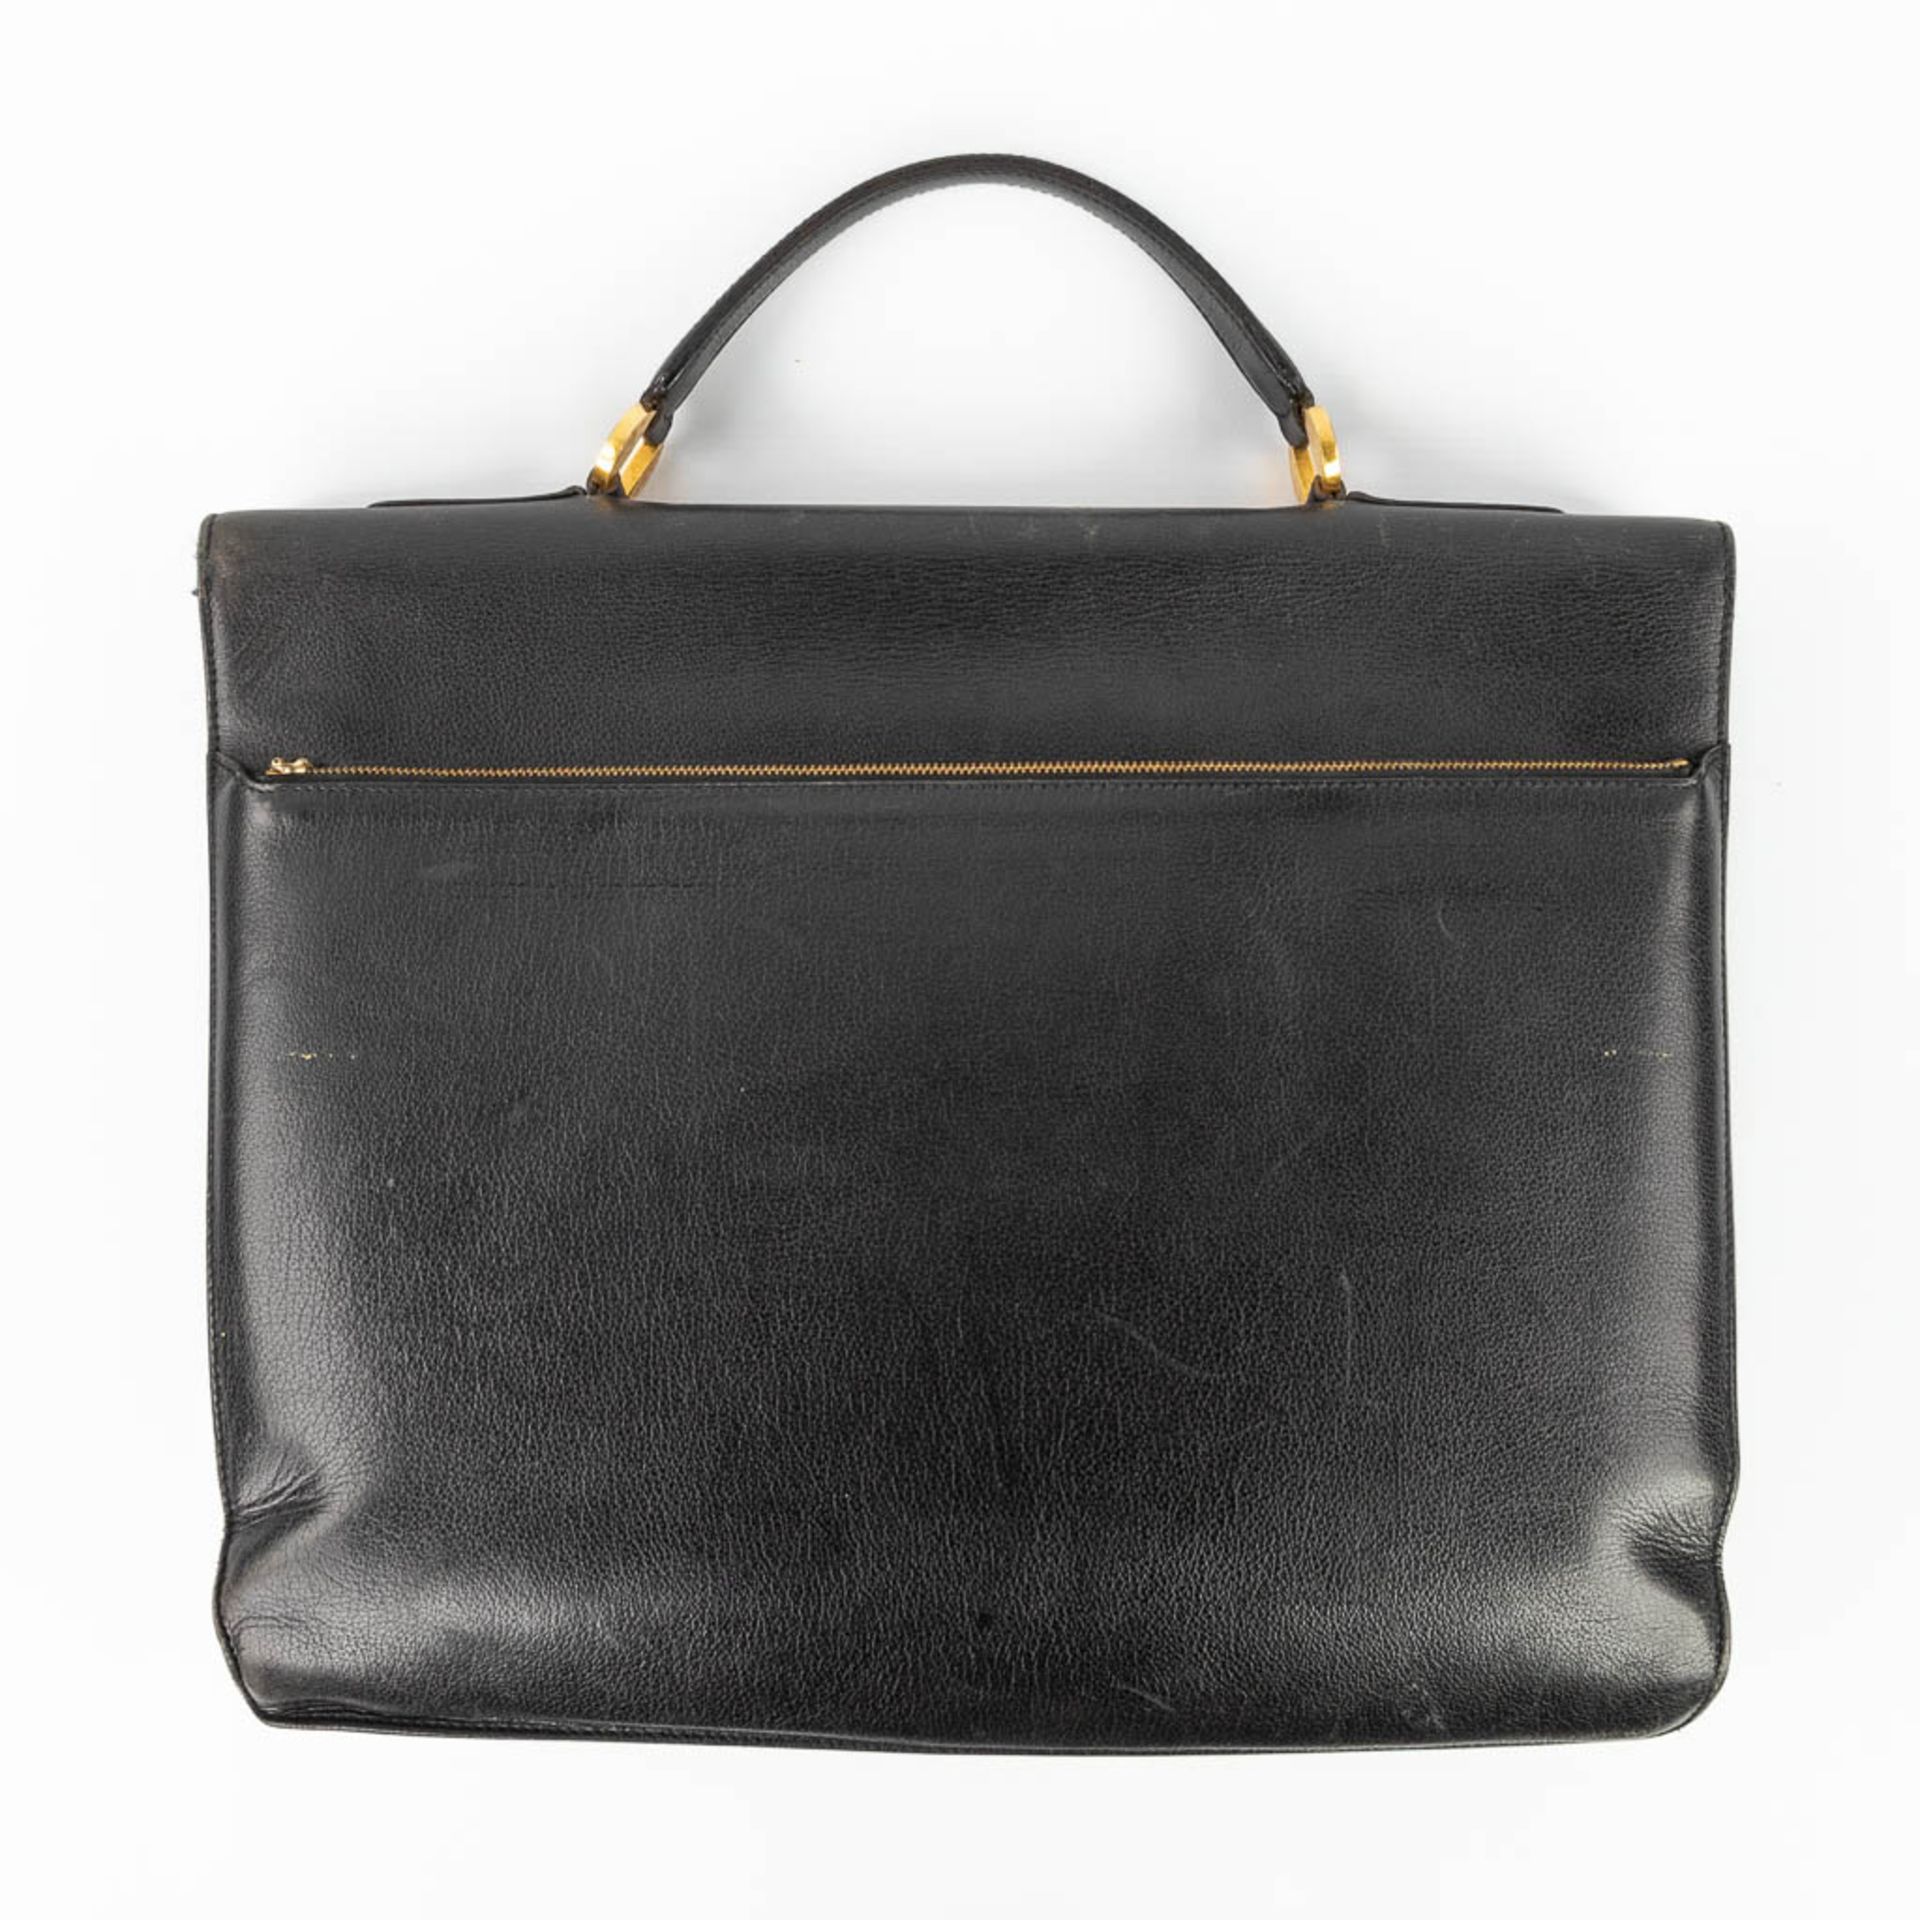 Delvaux, a suitcase made of black leather with gold-plated elements. (W:39 x H:33 cm) - Image 13 of 16